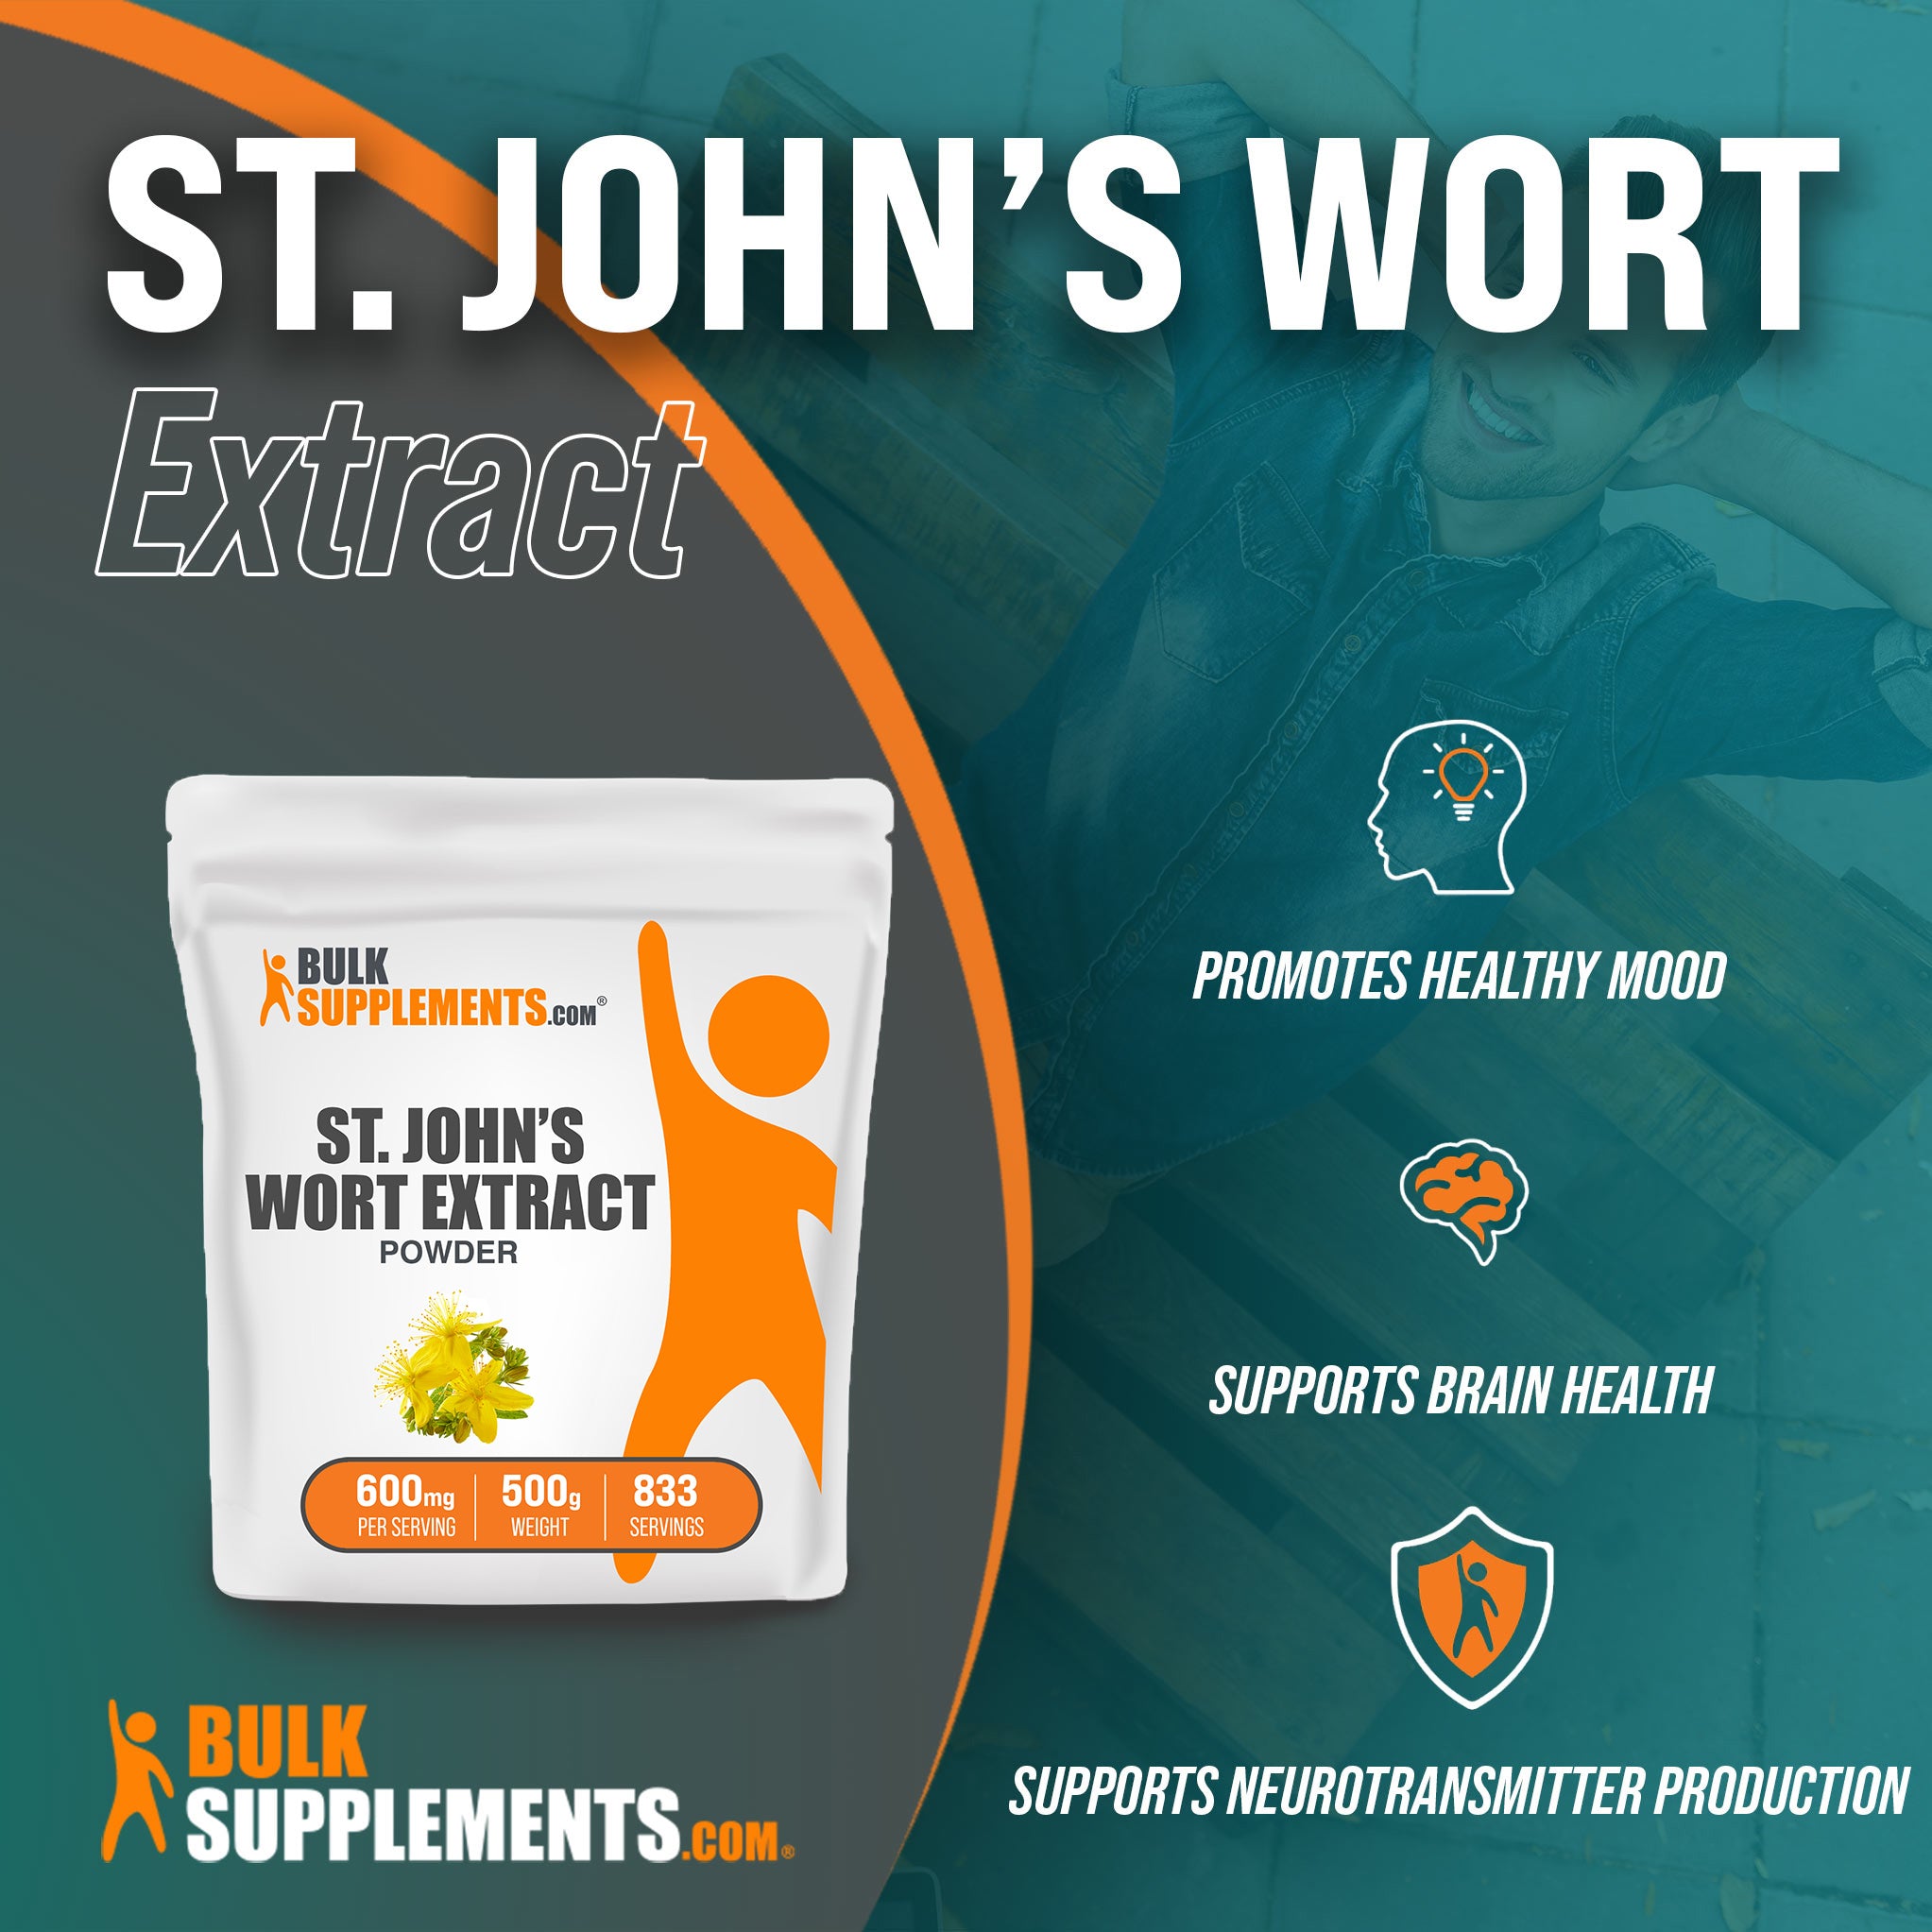 Benefits of St. John's Wort Extract: promotes healthy mood, supports brain health, supports neurotransmitter production